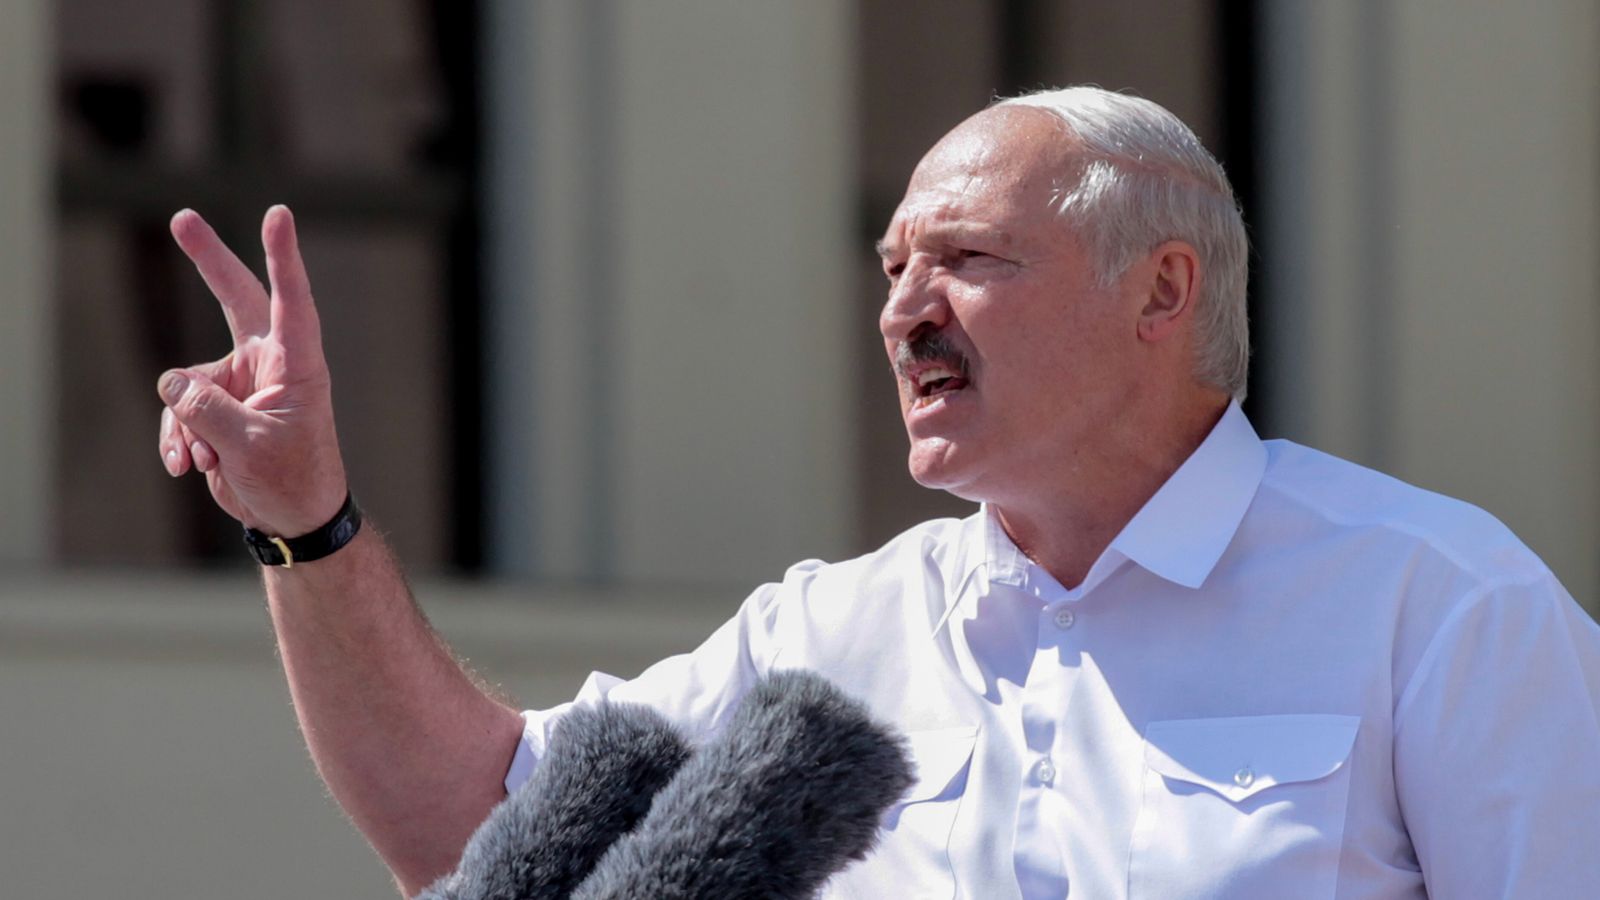 Belarus: There will be no new election until you kill me, President Lukashenko warns